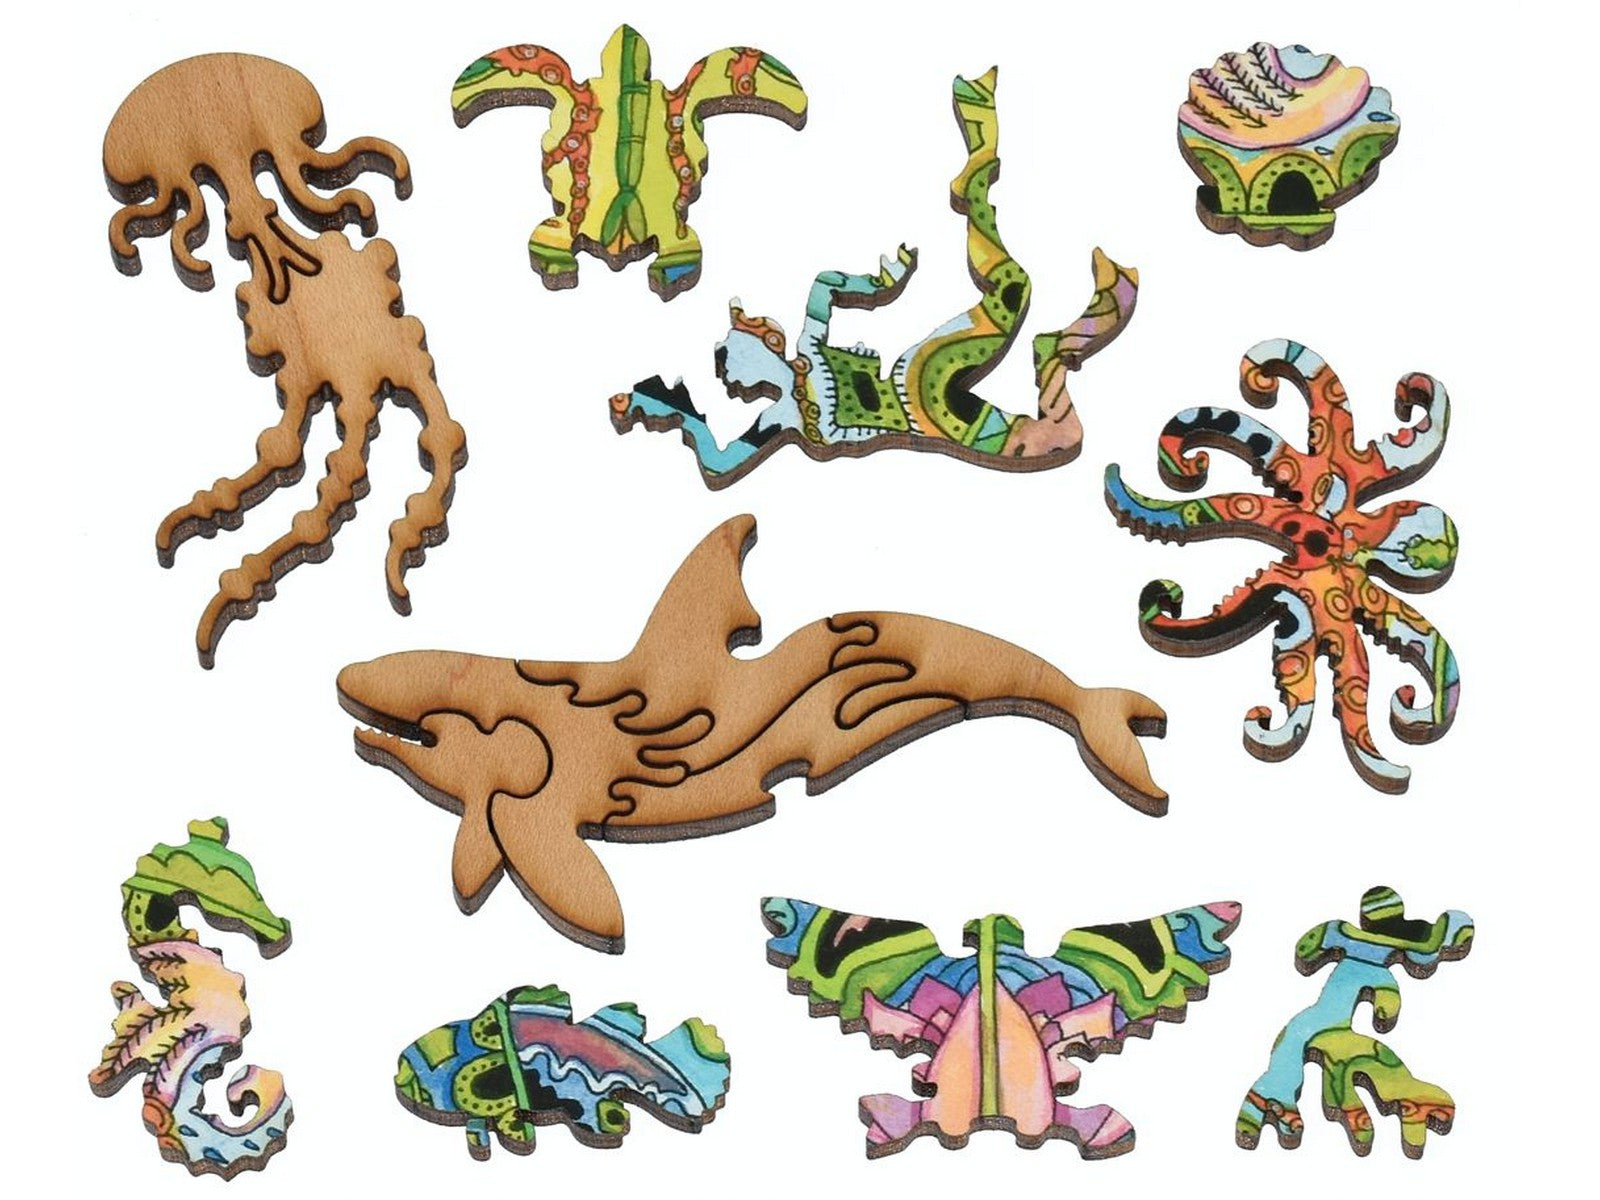 The whimsies that can be found in the puzzle, Sea Turtle round.